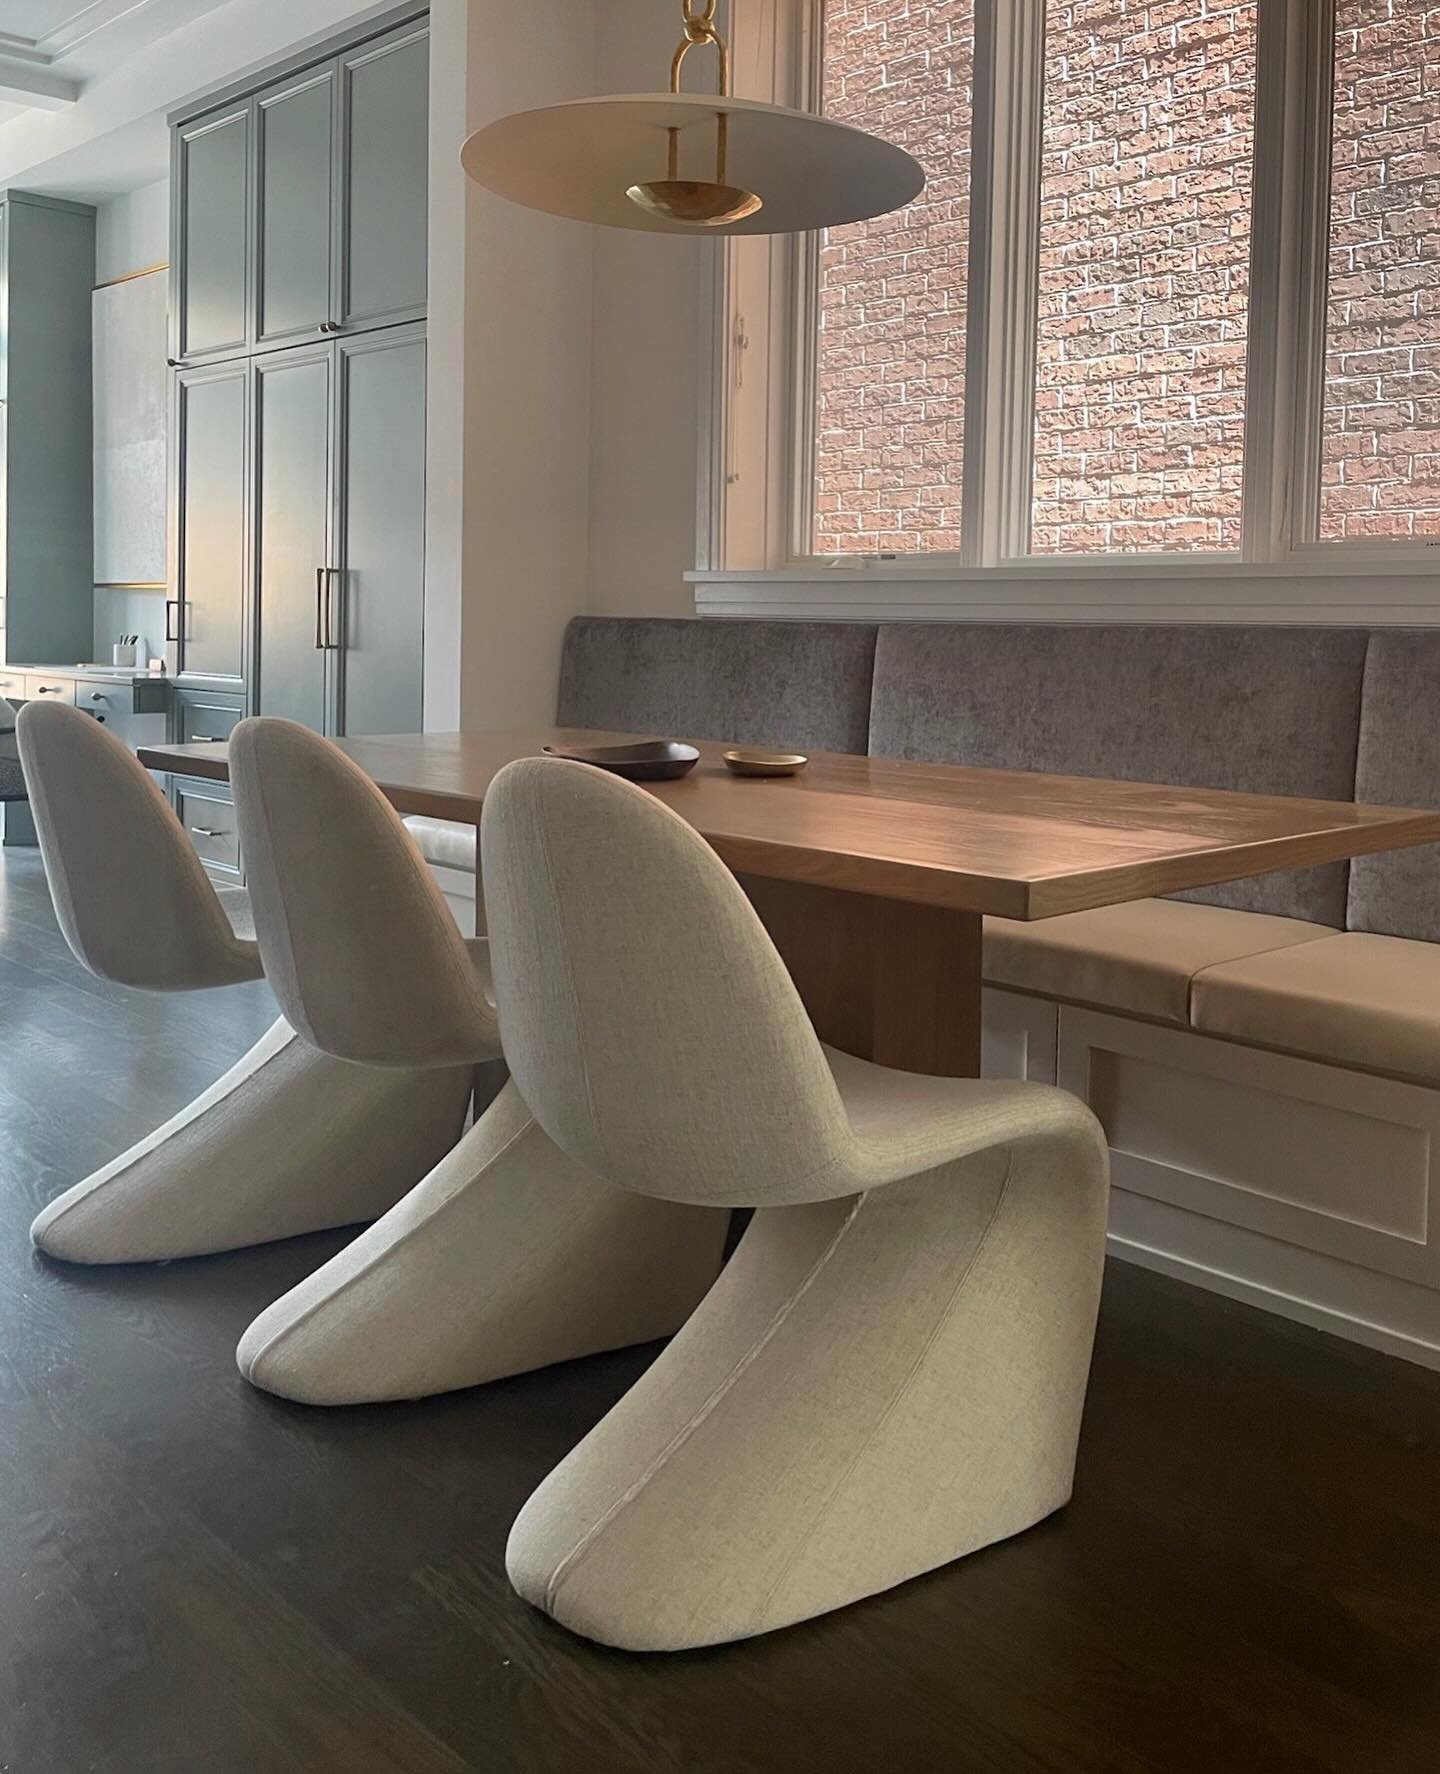 Another sneak peek at this latest renovation project in Lincoln Park! A custom banquette is paired with sculptural chairs in the beautiful breakfast room space. 

 #londonwalderinteriordesign #LWID #moderndesign #chicagodesigner #interiordesign #cust